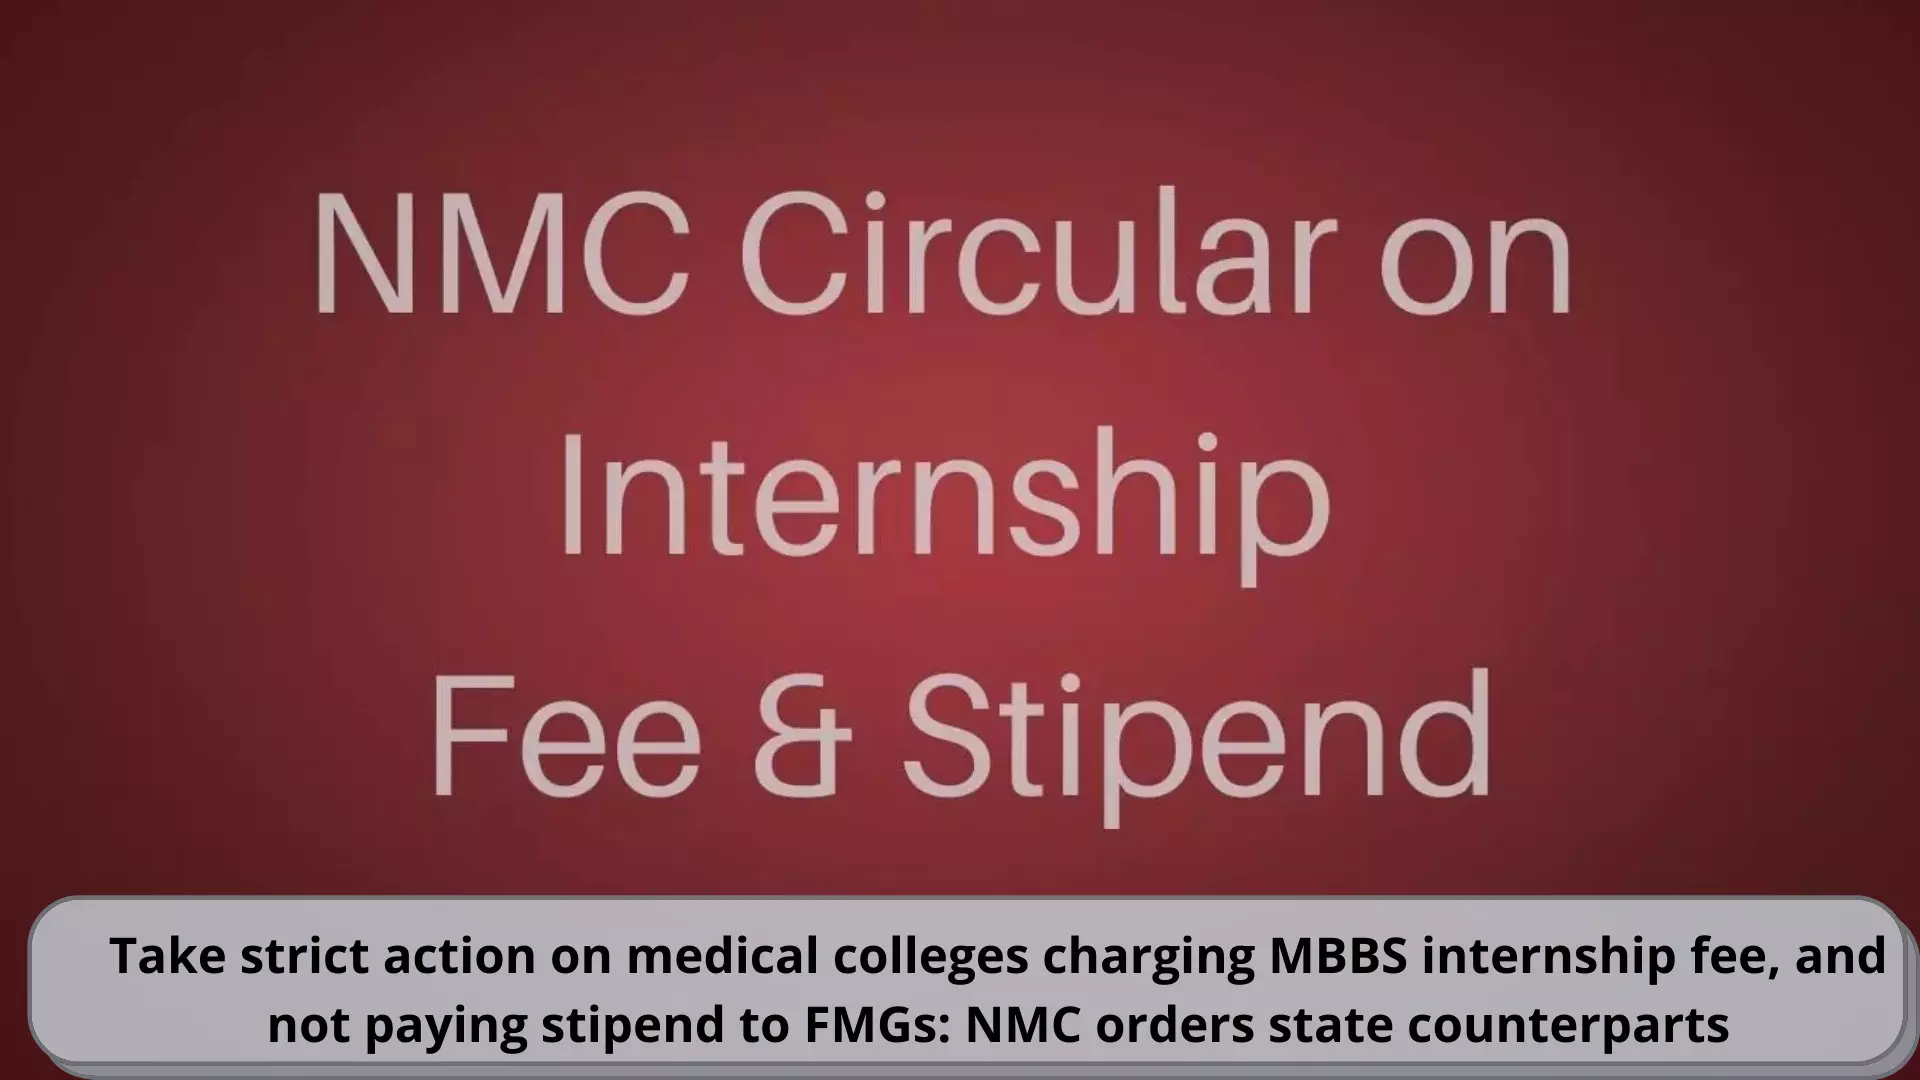 Take strict action on medical colleges charging MBBS internship fee, and not paying stipend to FMGs: NMC orders state counterparts